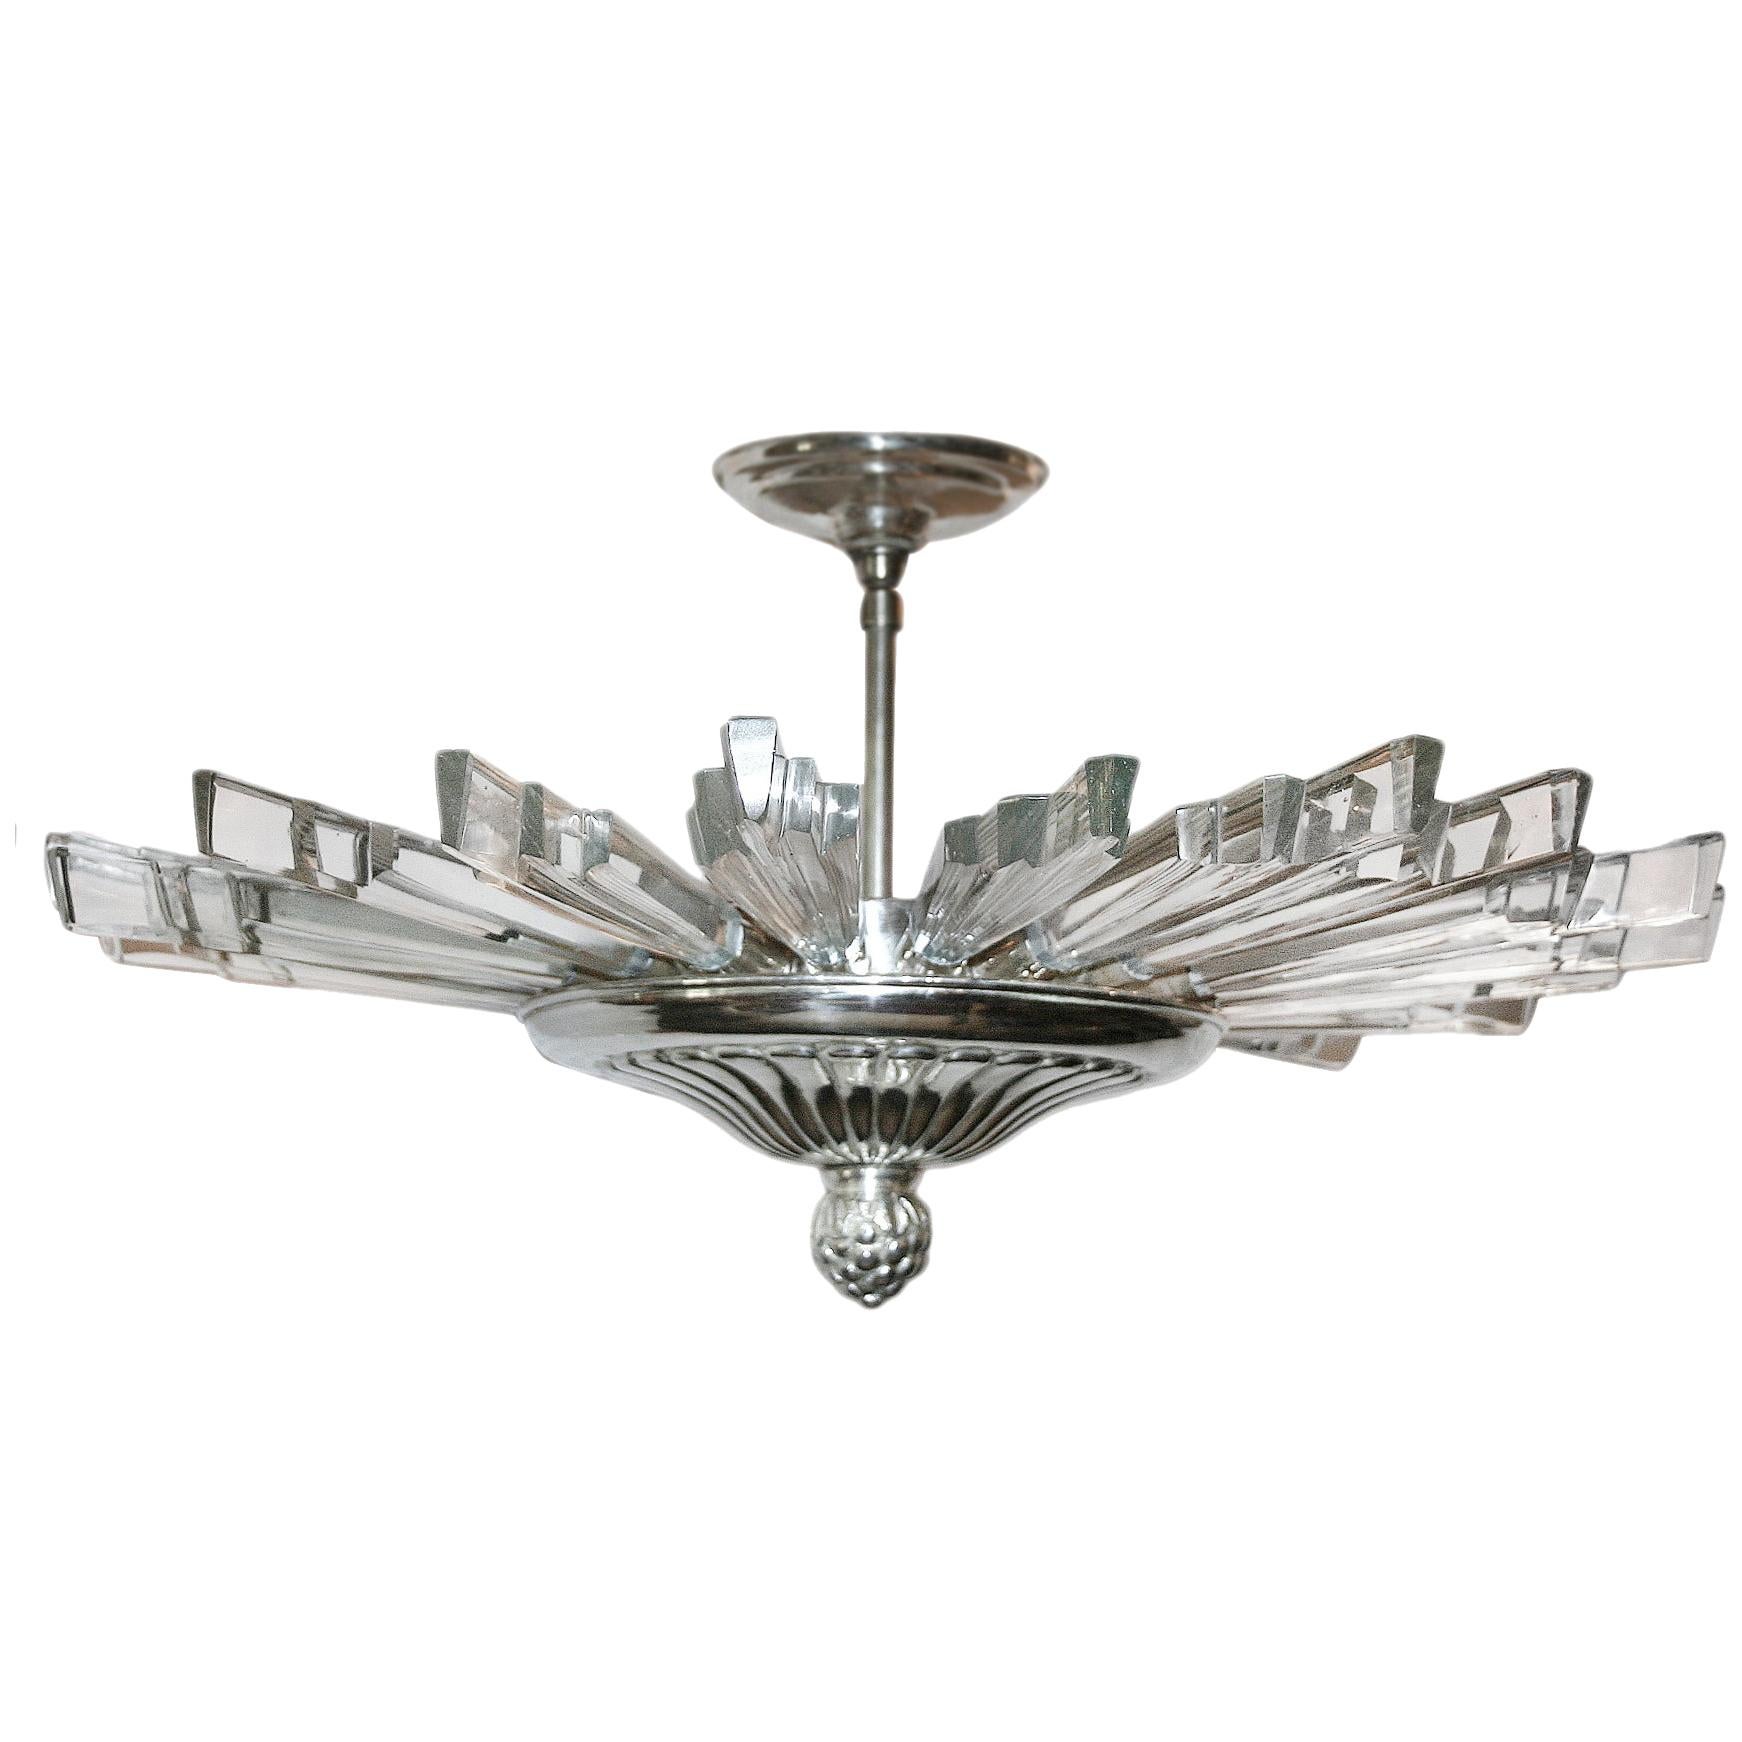 Set of Molded Glass Star Fixtures